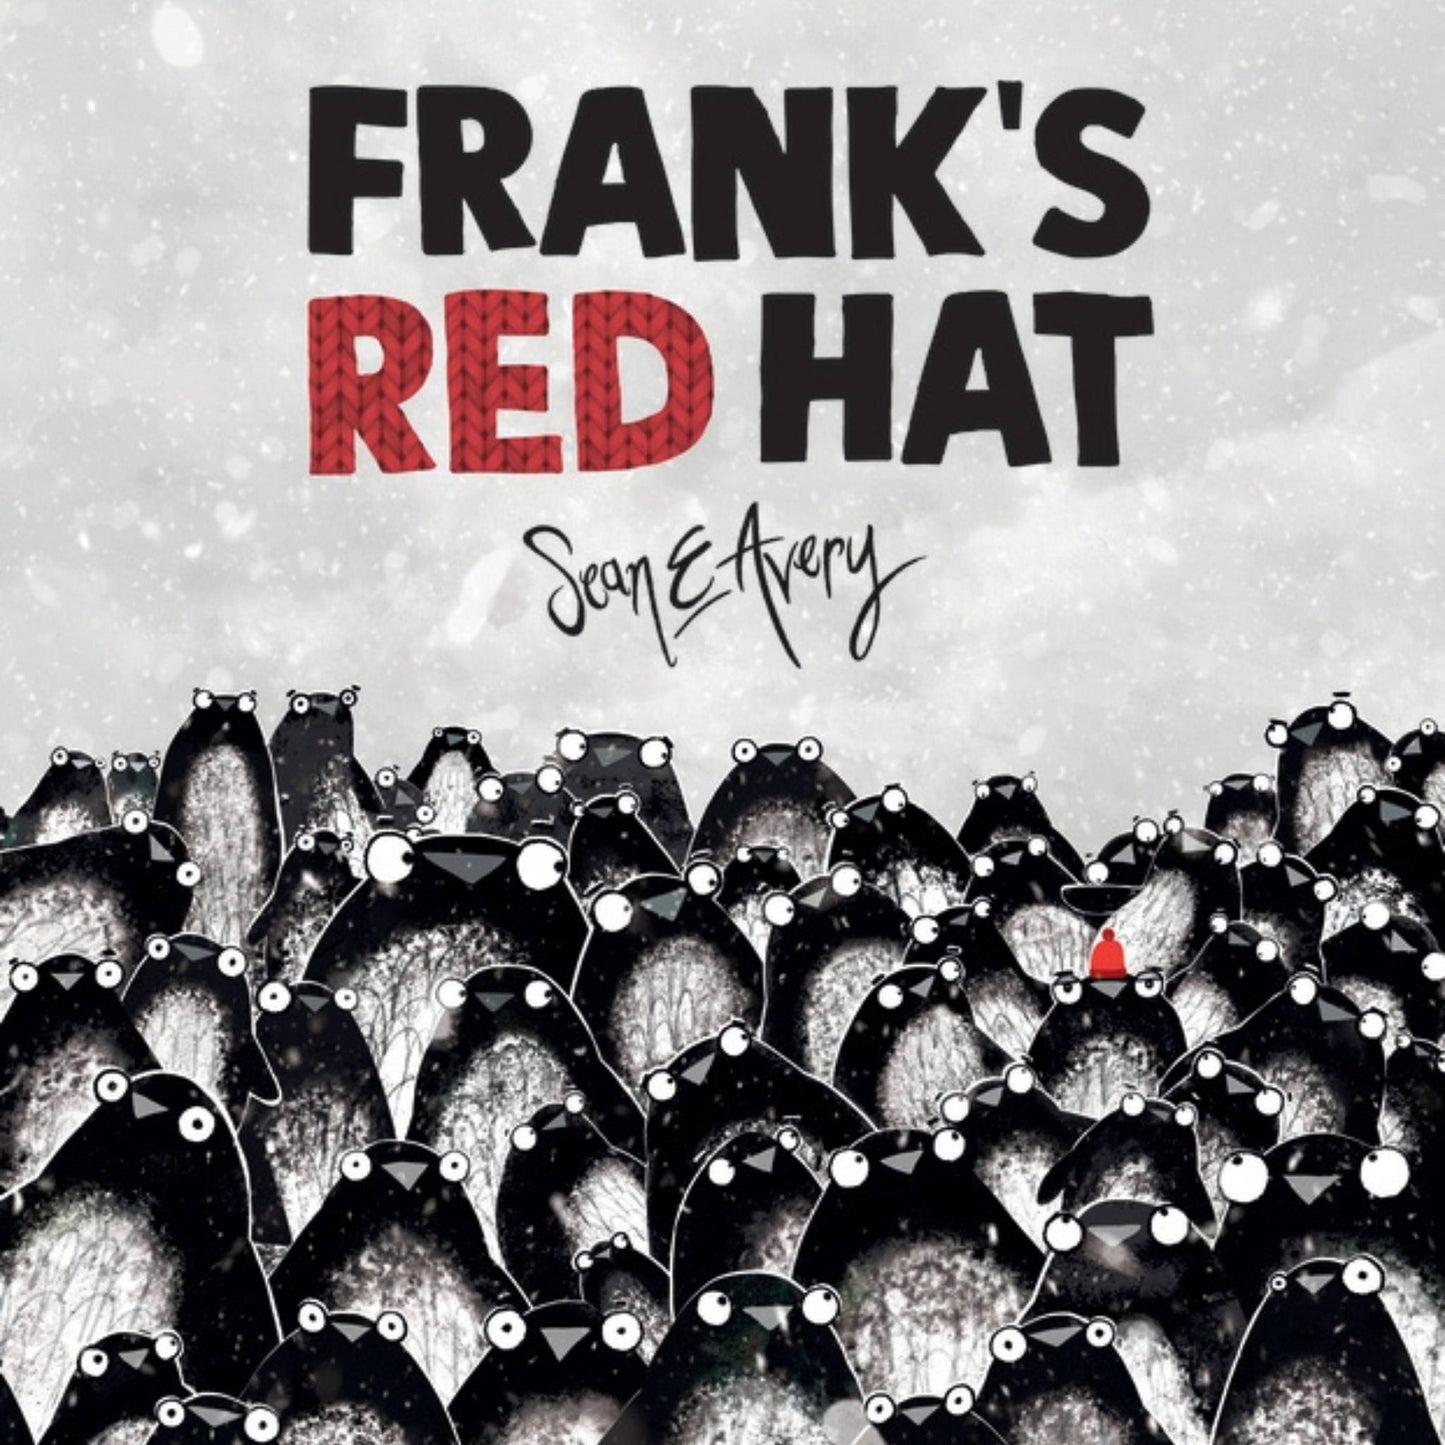 Frank's Red Hat